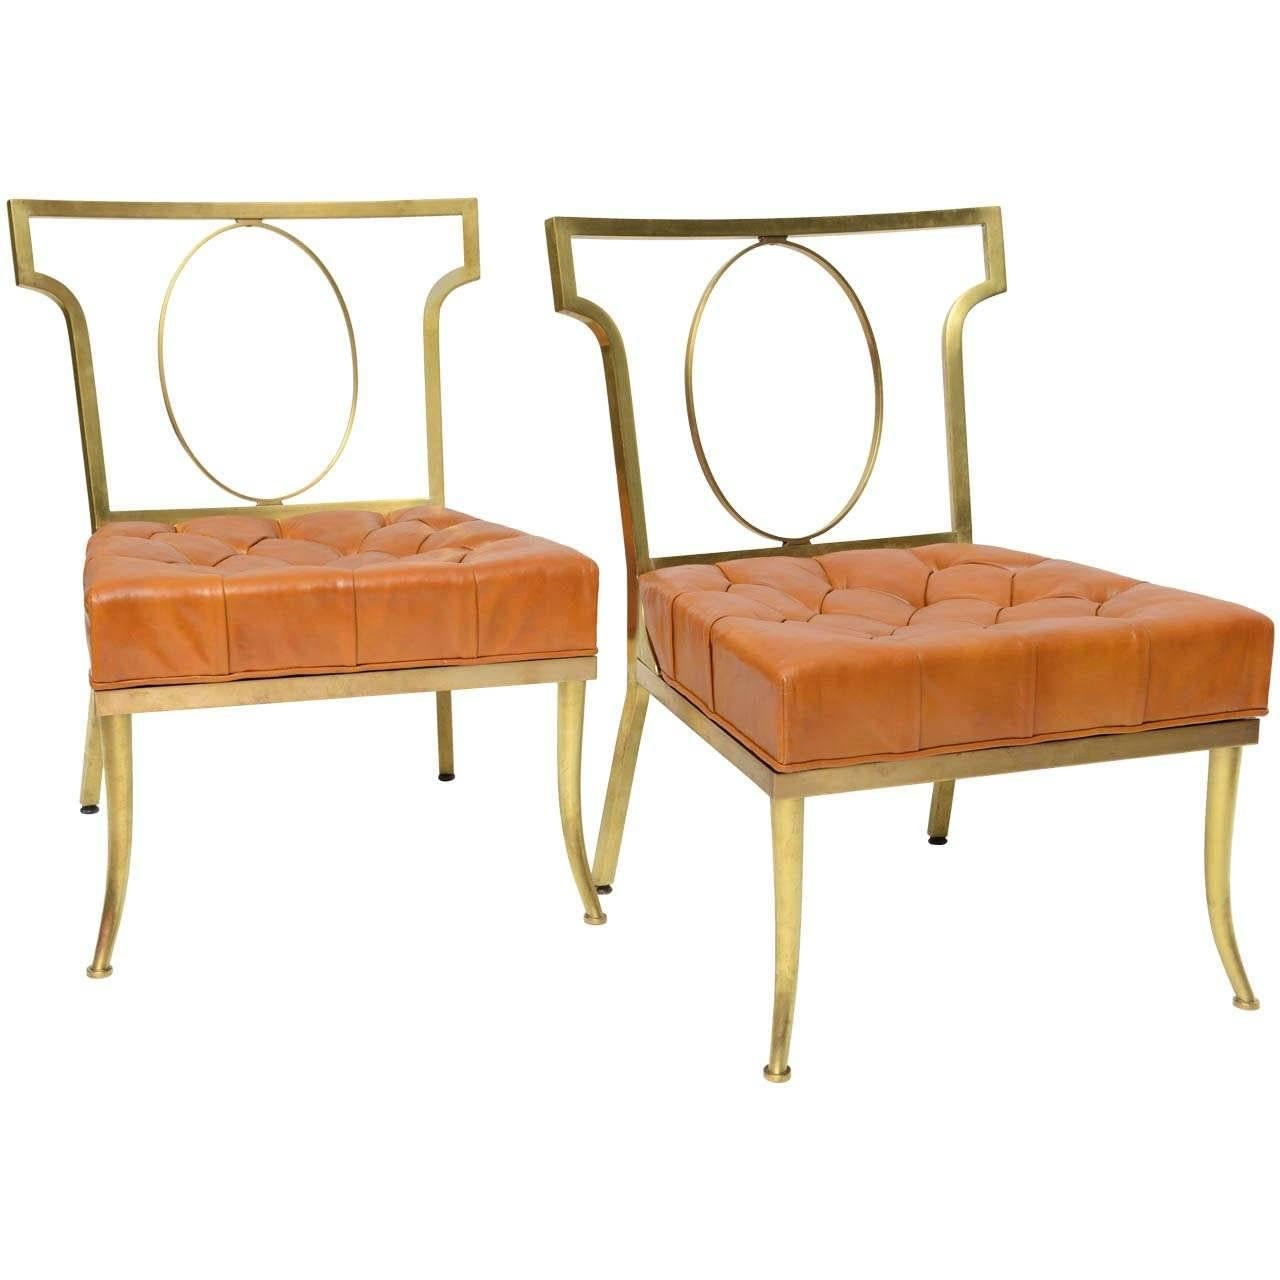 Pair of solid brass slipper chairs are Haines' interpretation of the ancient Greek 'klismos.' He created three versions of the chair: this sleek open-back design with a brass oval filling the negative space. They retain the original orange leather